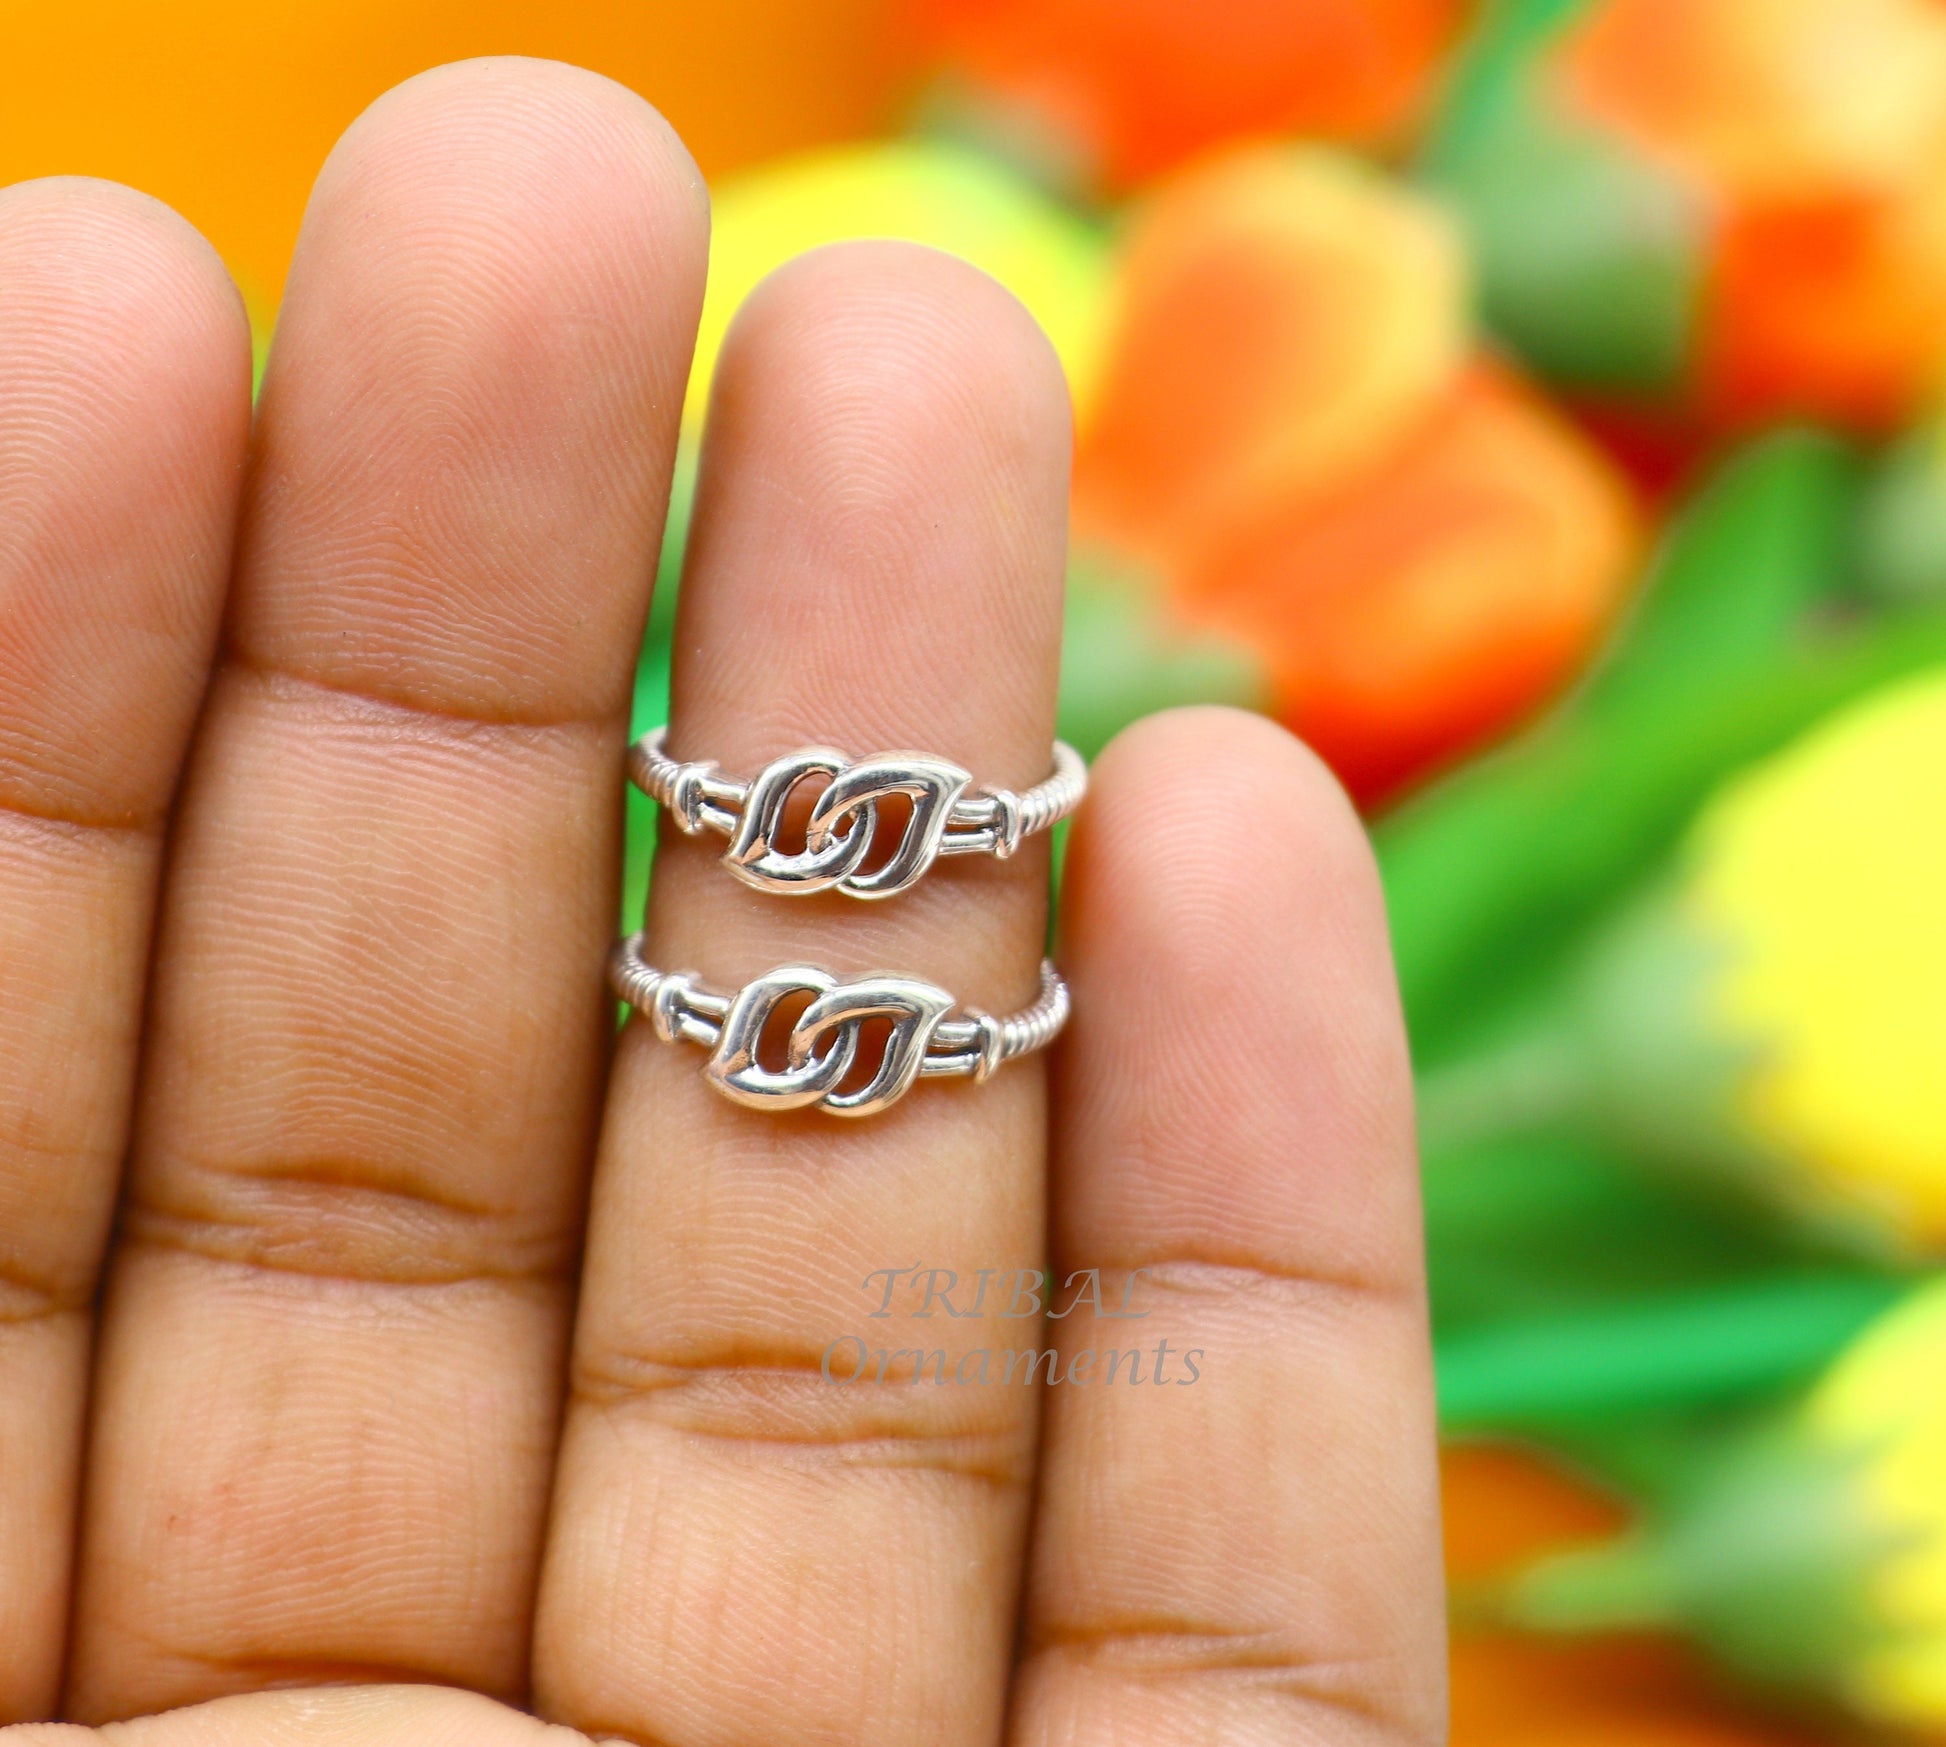 925 sterling silver handmade amazing vintage style simple toe ring, best gifting tiny tone ring 925 stamped jewelry from india ytr10 - TRIBAL ORNAMENTS